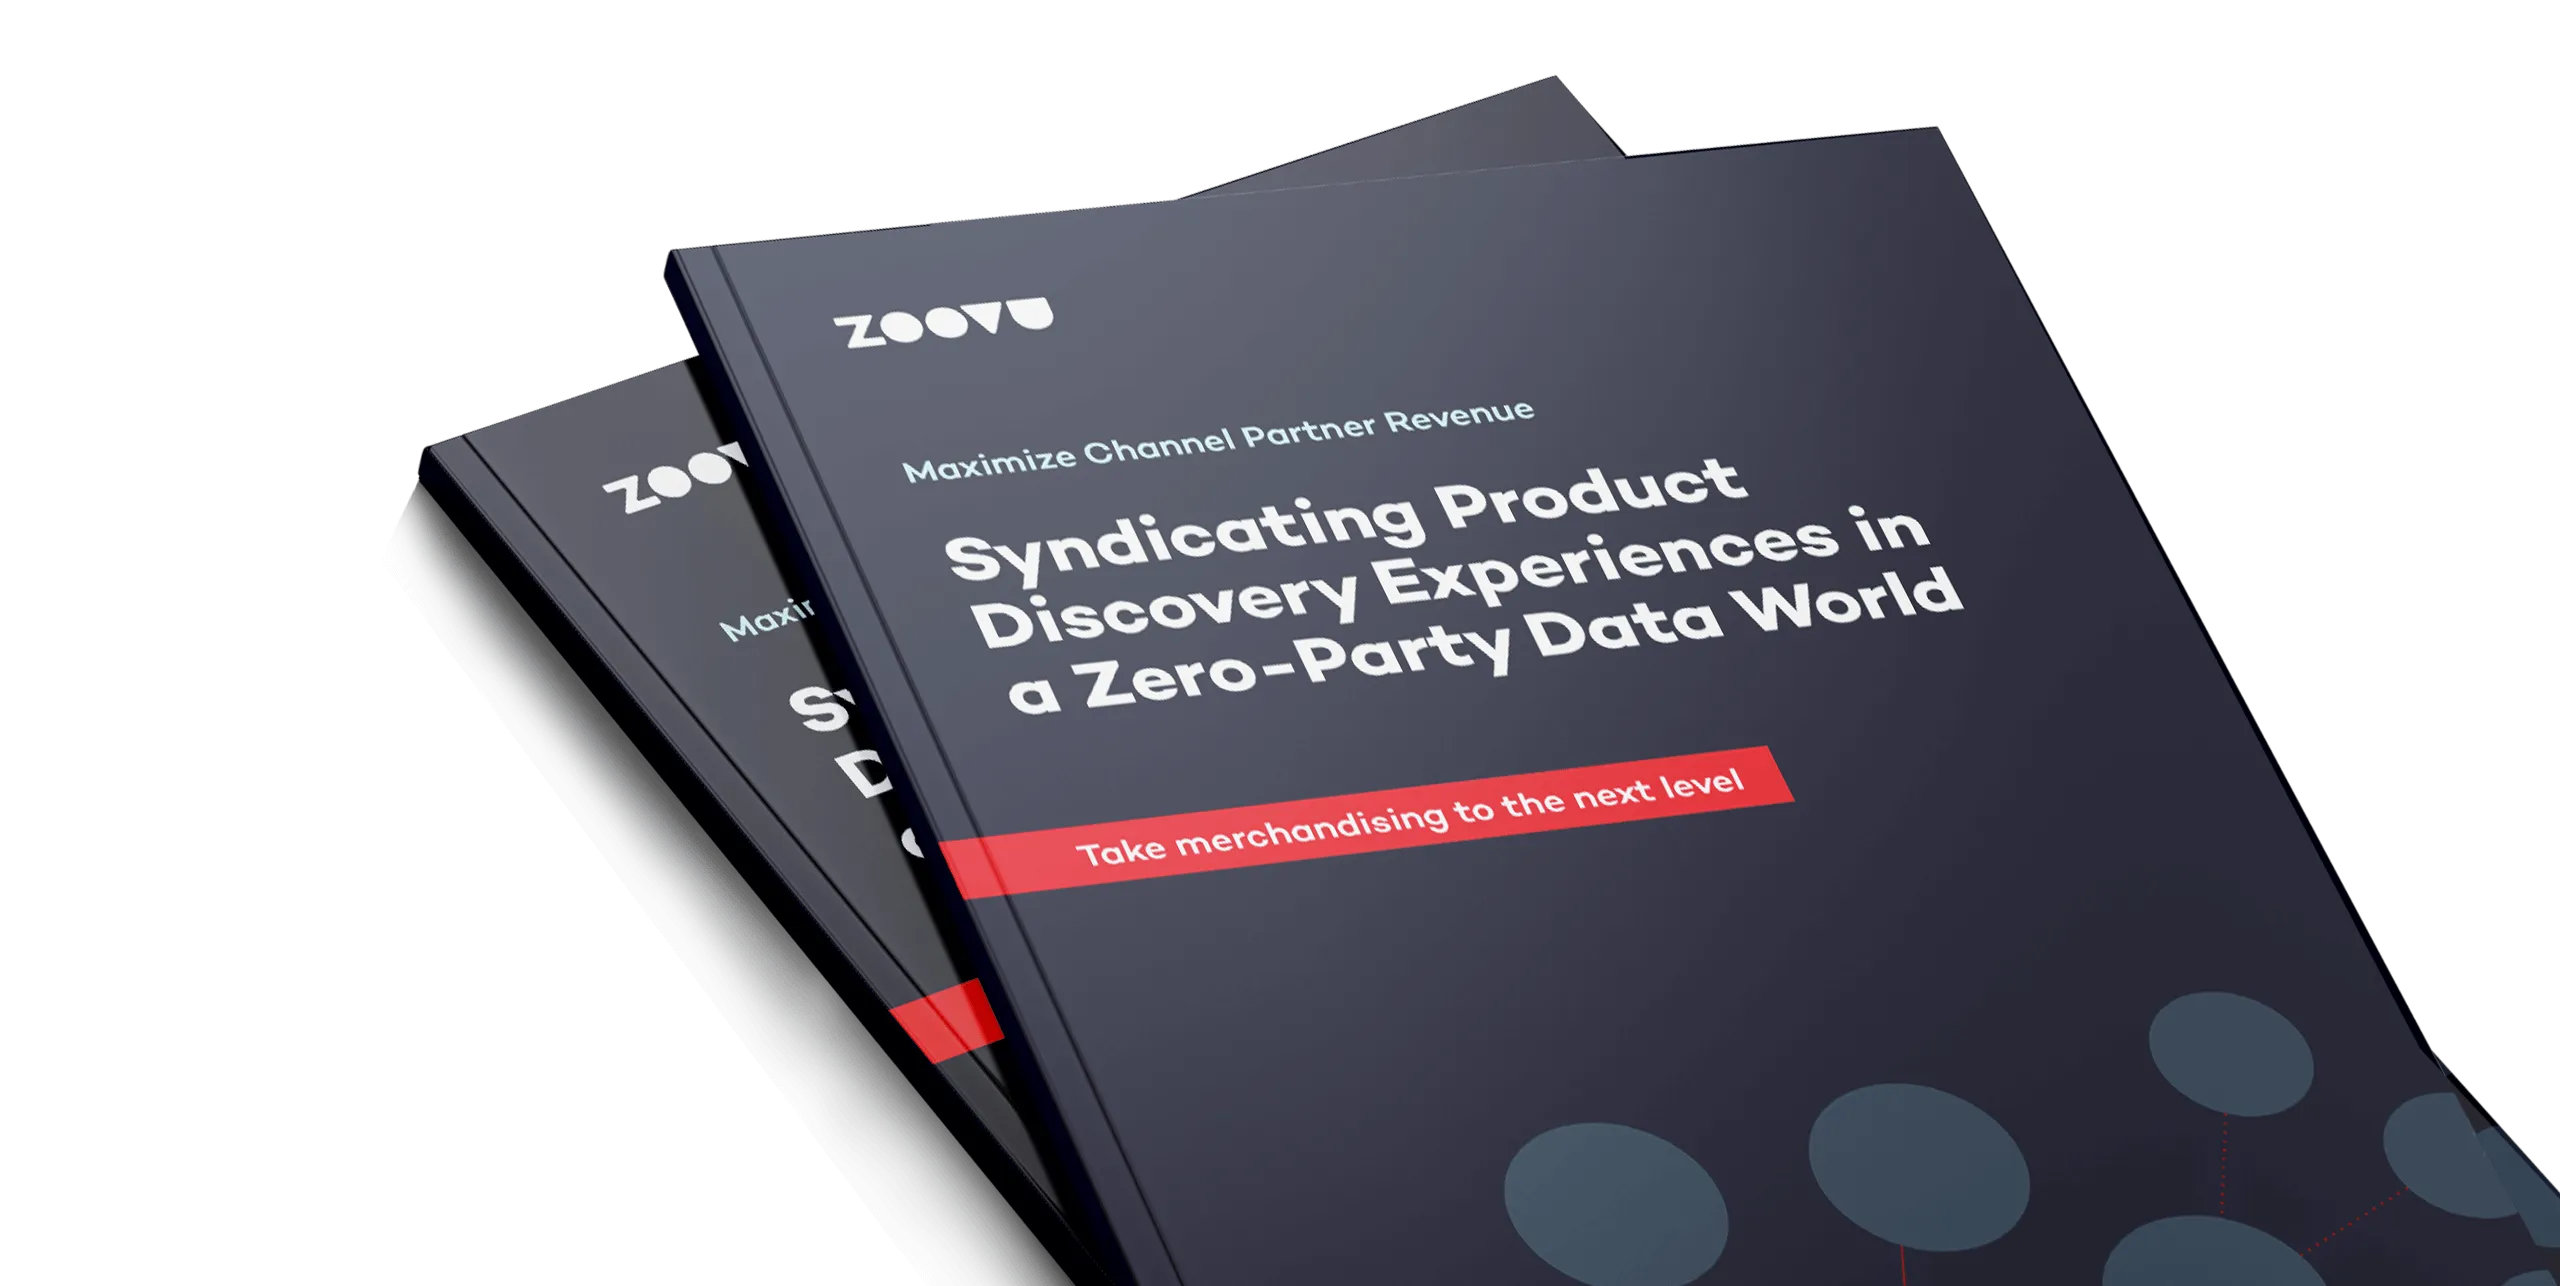 Syndacation ebook: Discovery experiences in a zero-party data world